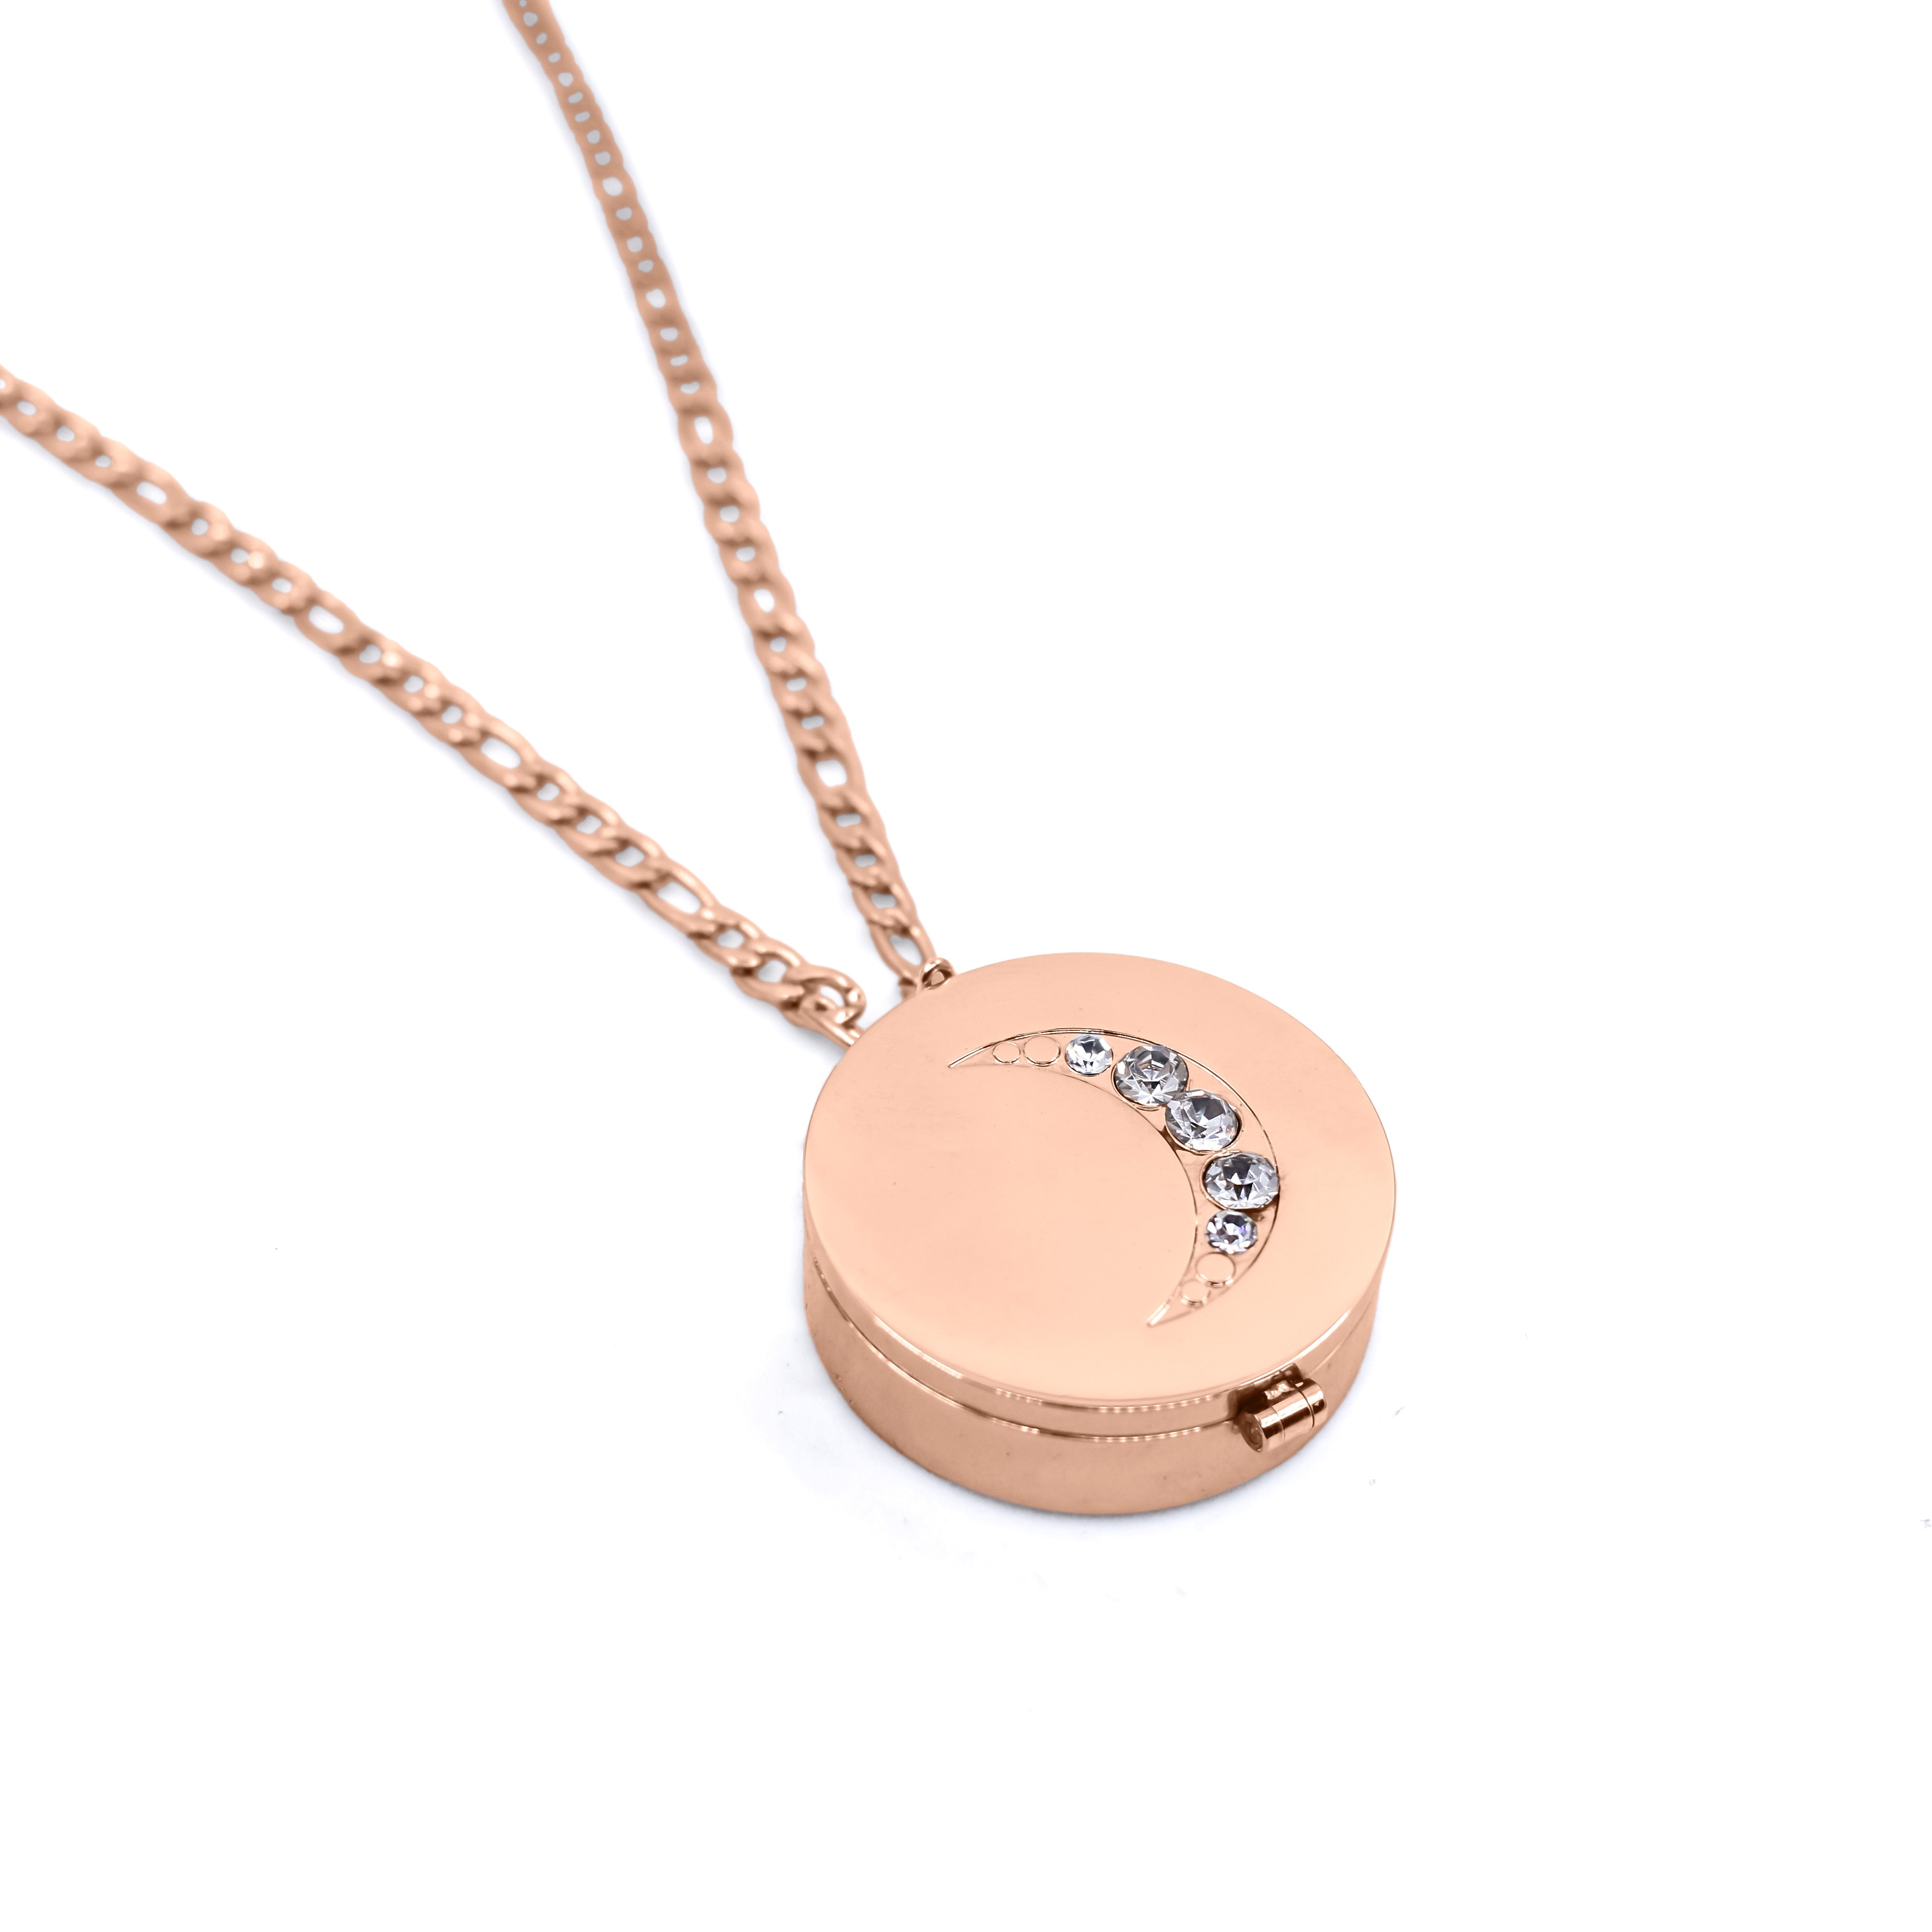 Crescent Moon Lip Balm Necklace in Rose Gold - getbalmy